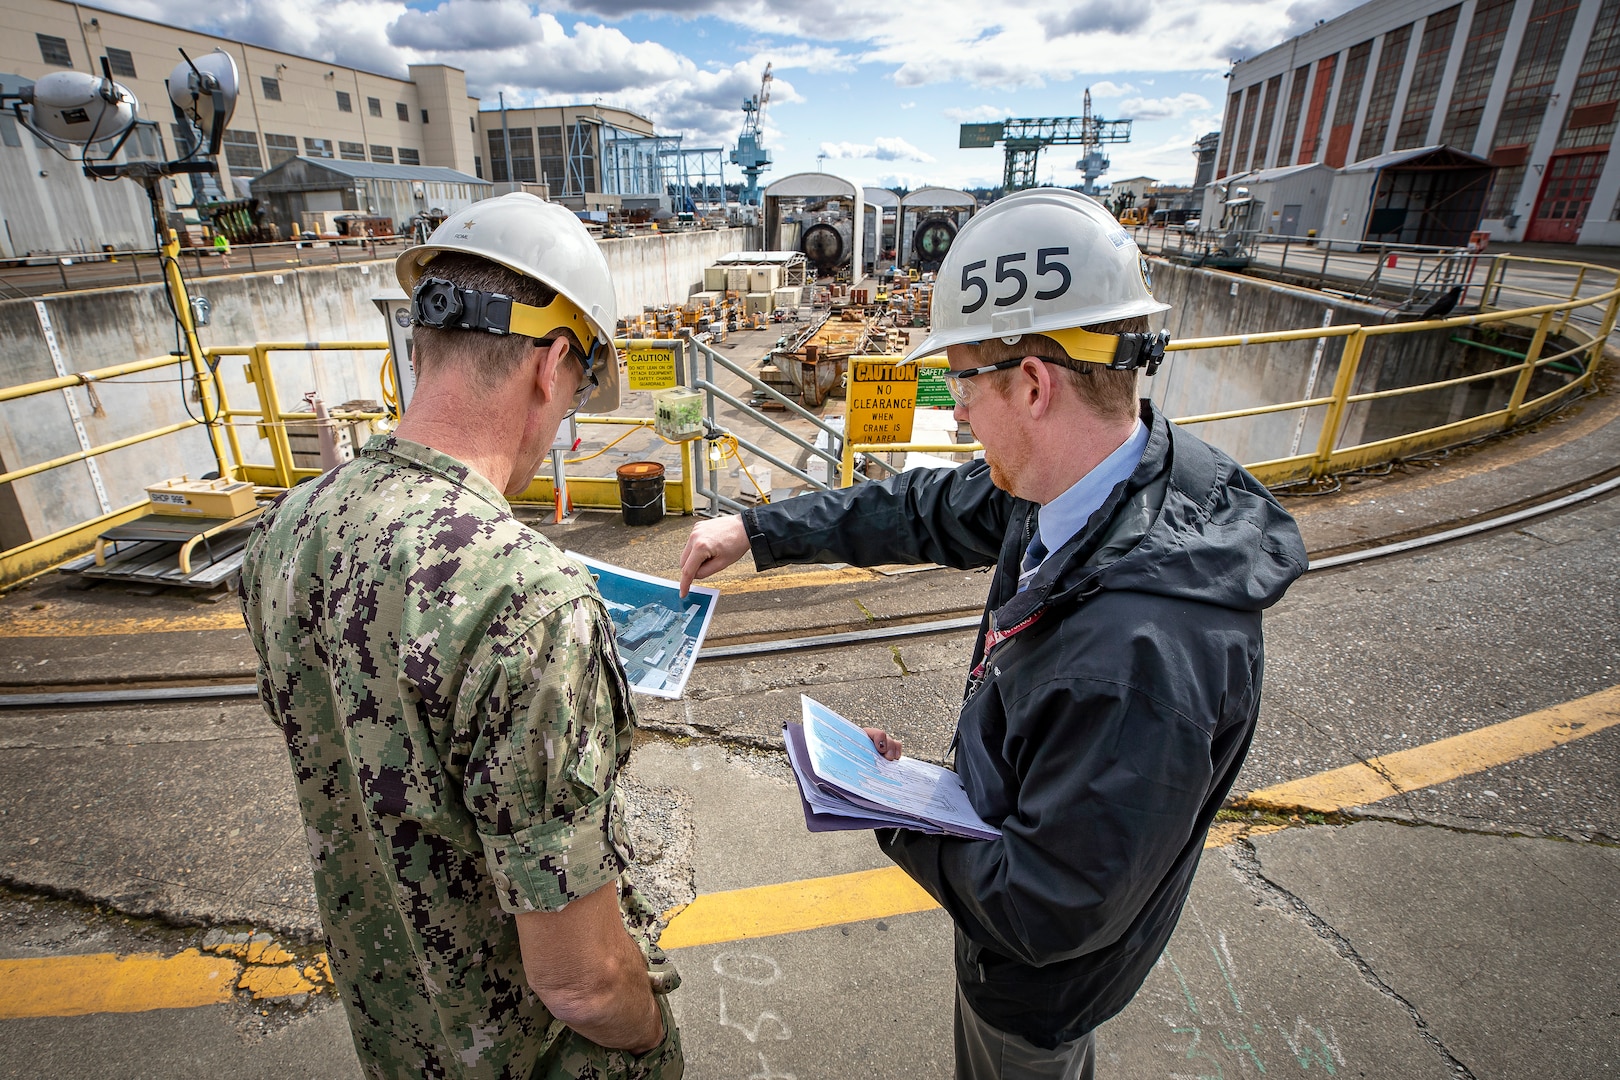 Rear Adm. Scott M. Brown, deputy commander, Naval Sea Systems Command Industrial Operations, is briefed on Shipyard Infrastructure Optimization Program by Dave Sweet, deputy program manager, PMS 555, March 31, 2022 during a tour of Puget Sound Naval Shipyard & Intermediate Maintenance Facility. Brown is the Waterfront Pillar lead for Naval Sustainment System-Shipyard, one of nine pillars meant to support the mechanics at the deckplate level and empower them to innovate and elevate issues. (U.S. Navy photo by Scott Hansen)